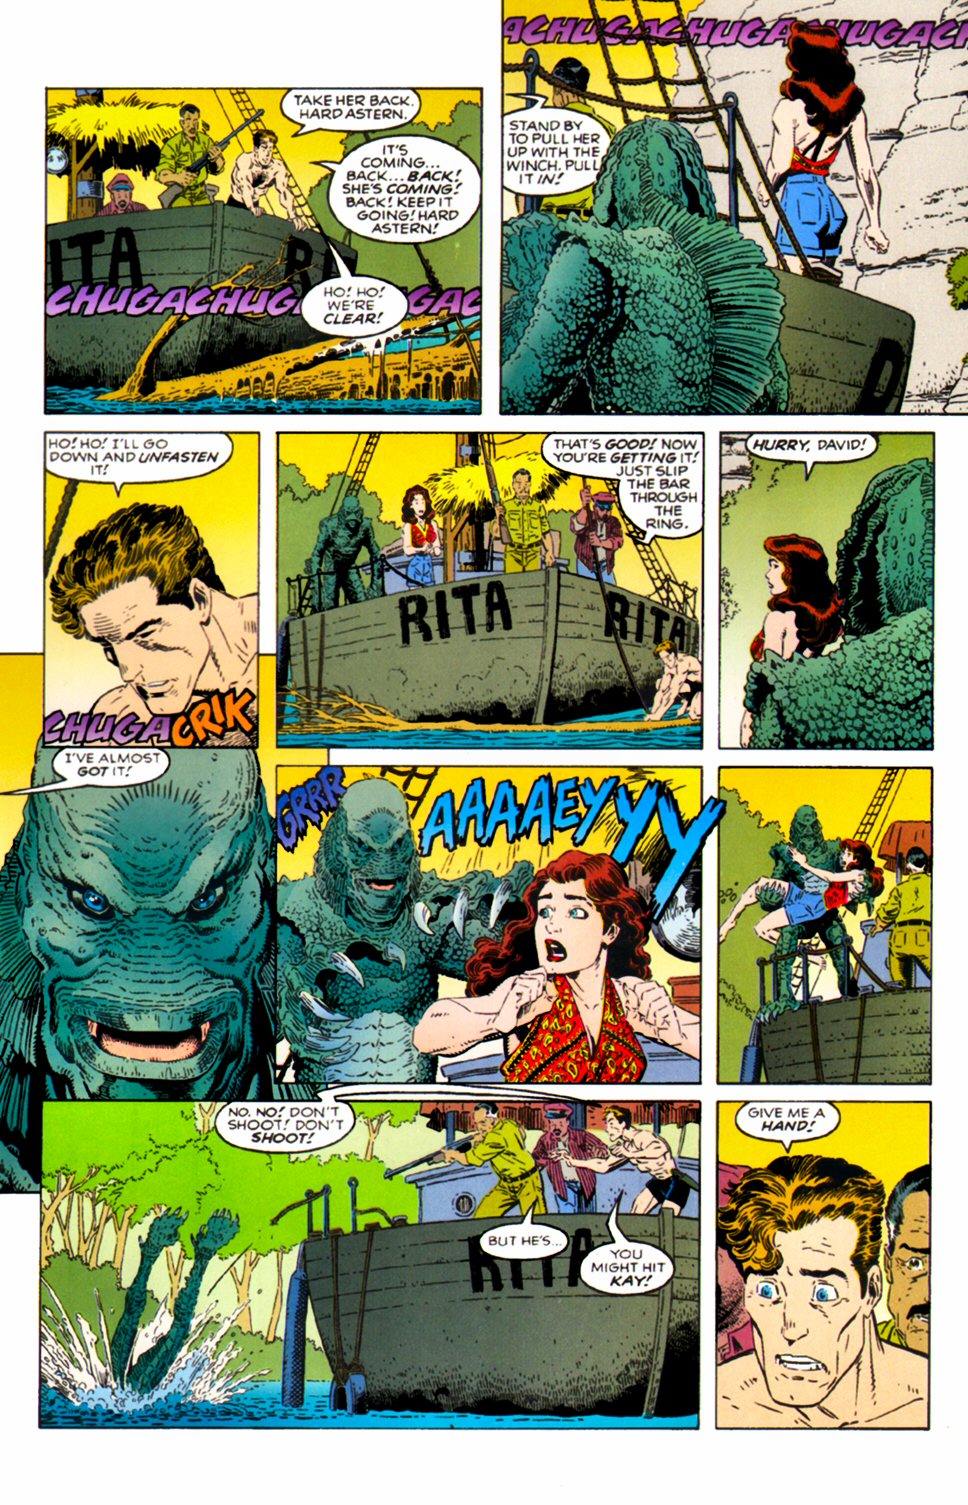 Read online Creature From The Black Lagoon comic -  Issue # Full - 47